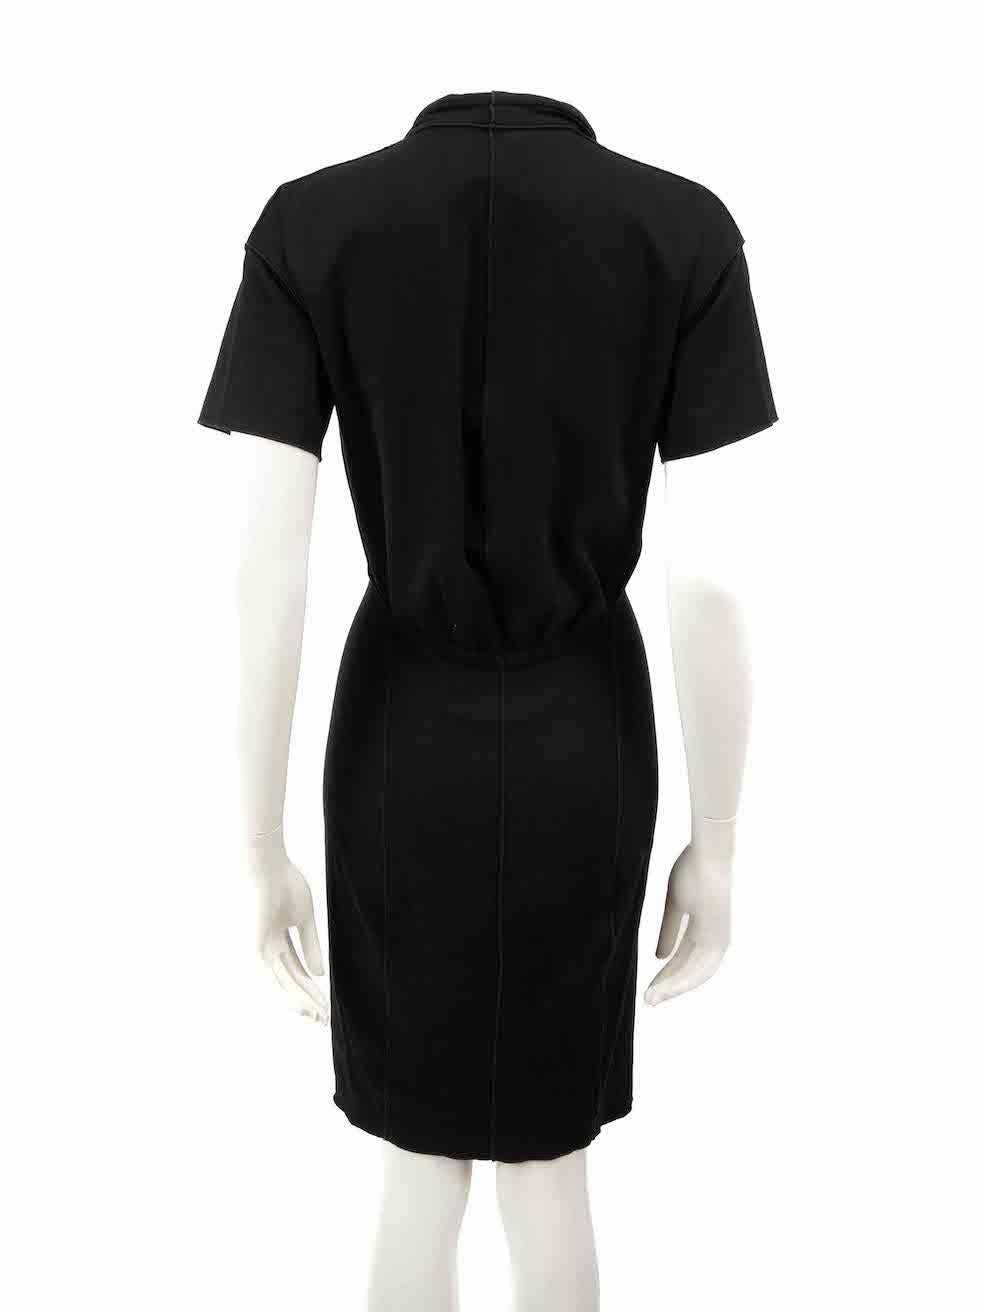 Saint Laurent Black V-Neck Knee Length Dress Size XS In Excellent Condition For Sale In London, GB